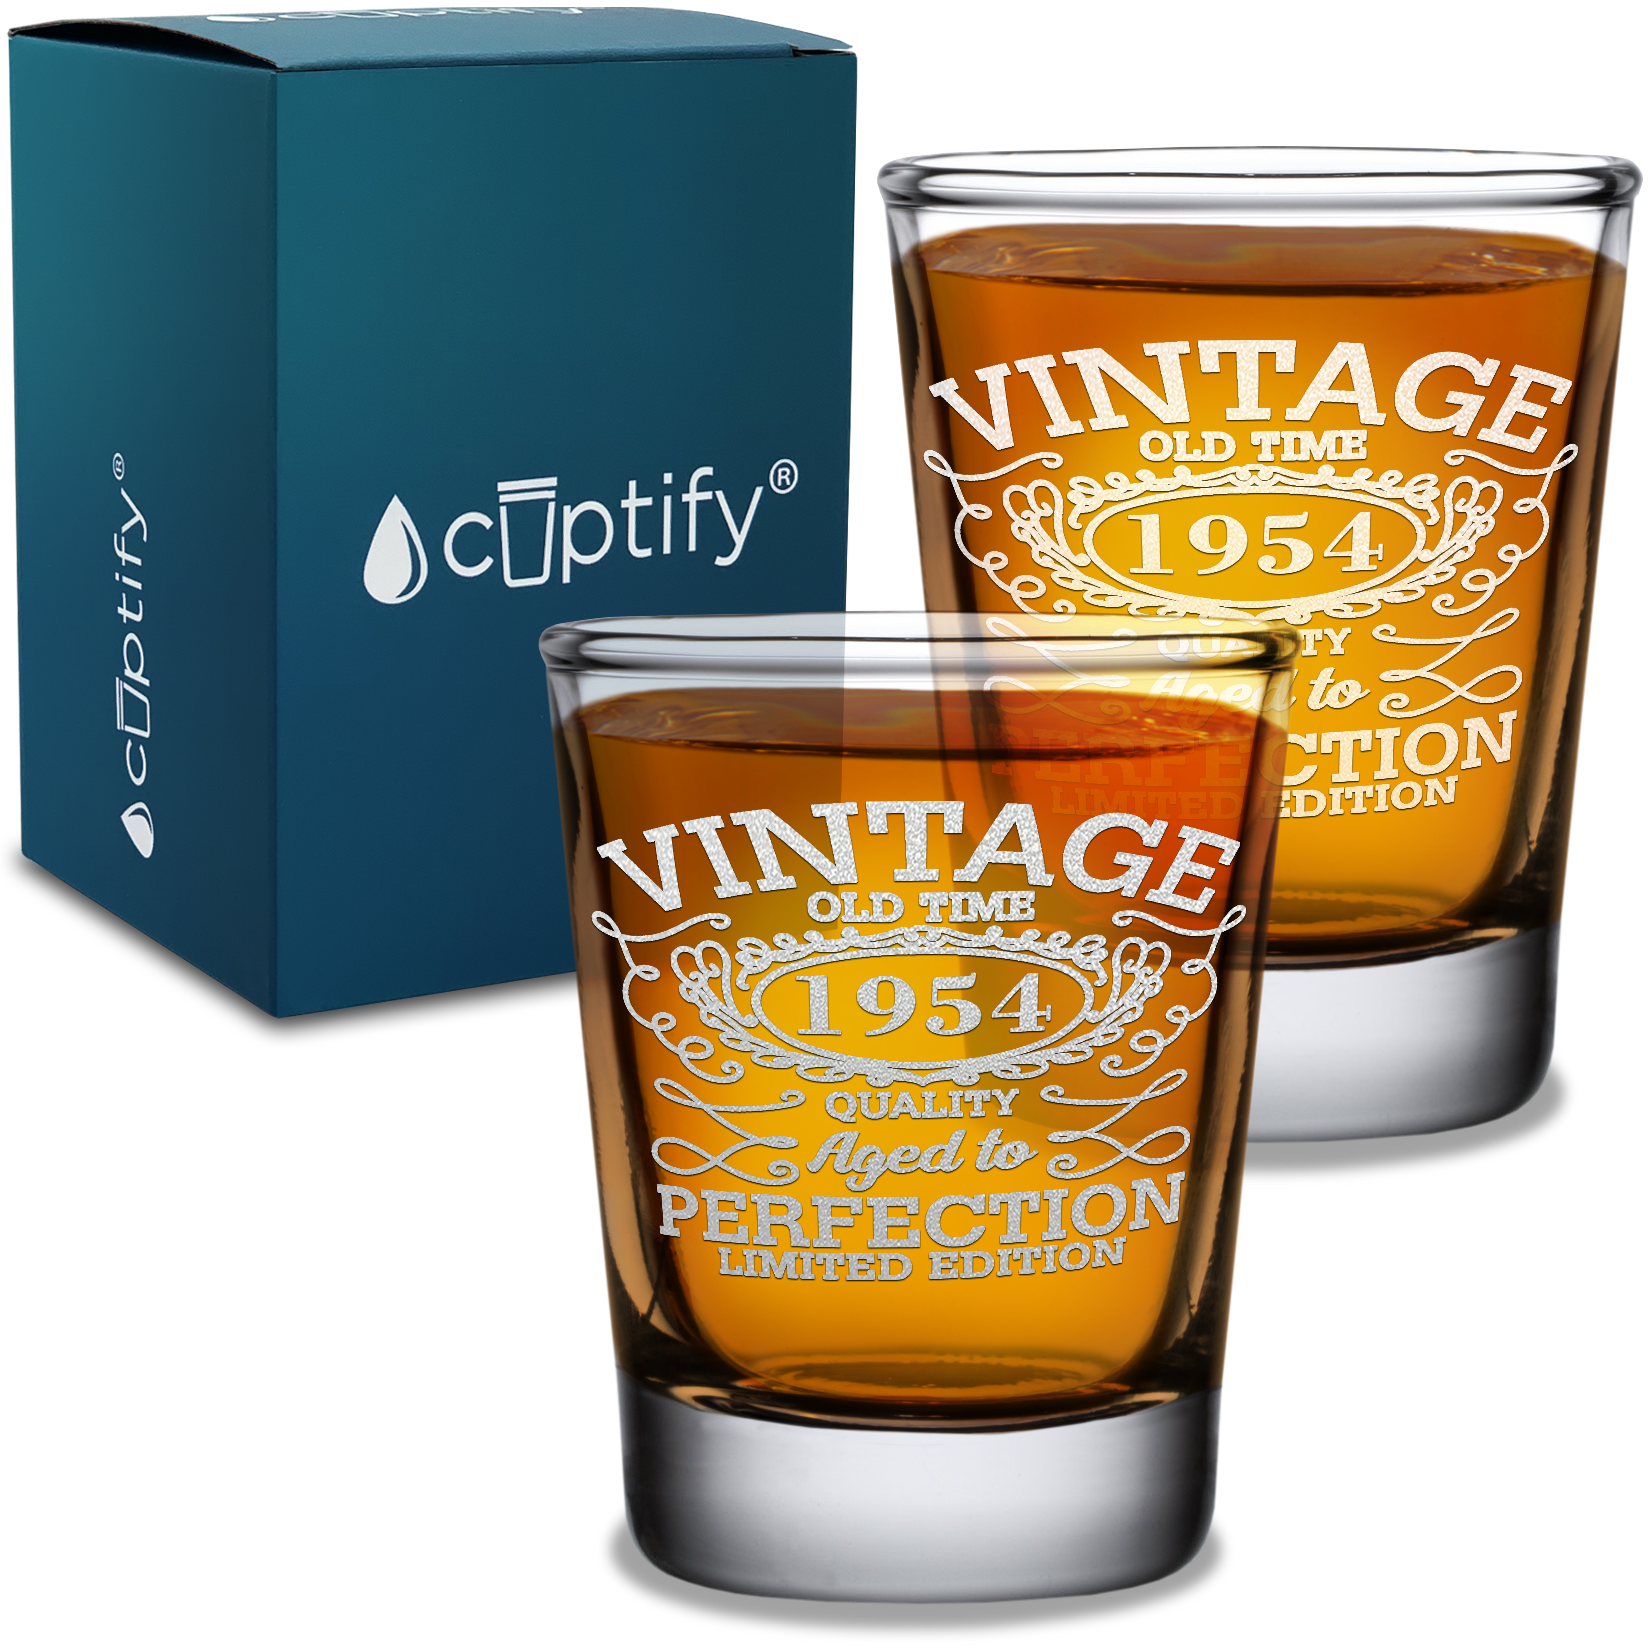 67th Birthday Vintage 67 Years Old Time 1954 Quality Laser Engraved 2oz Shot Glasses - Set of 2